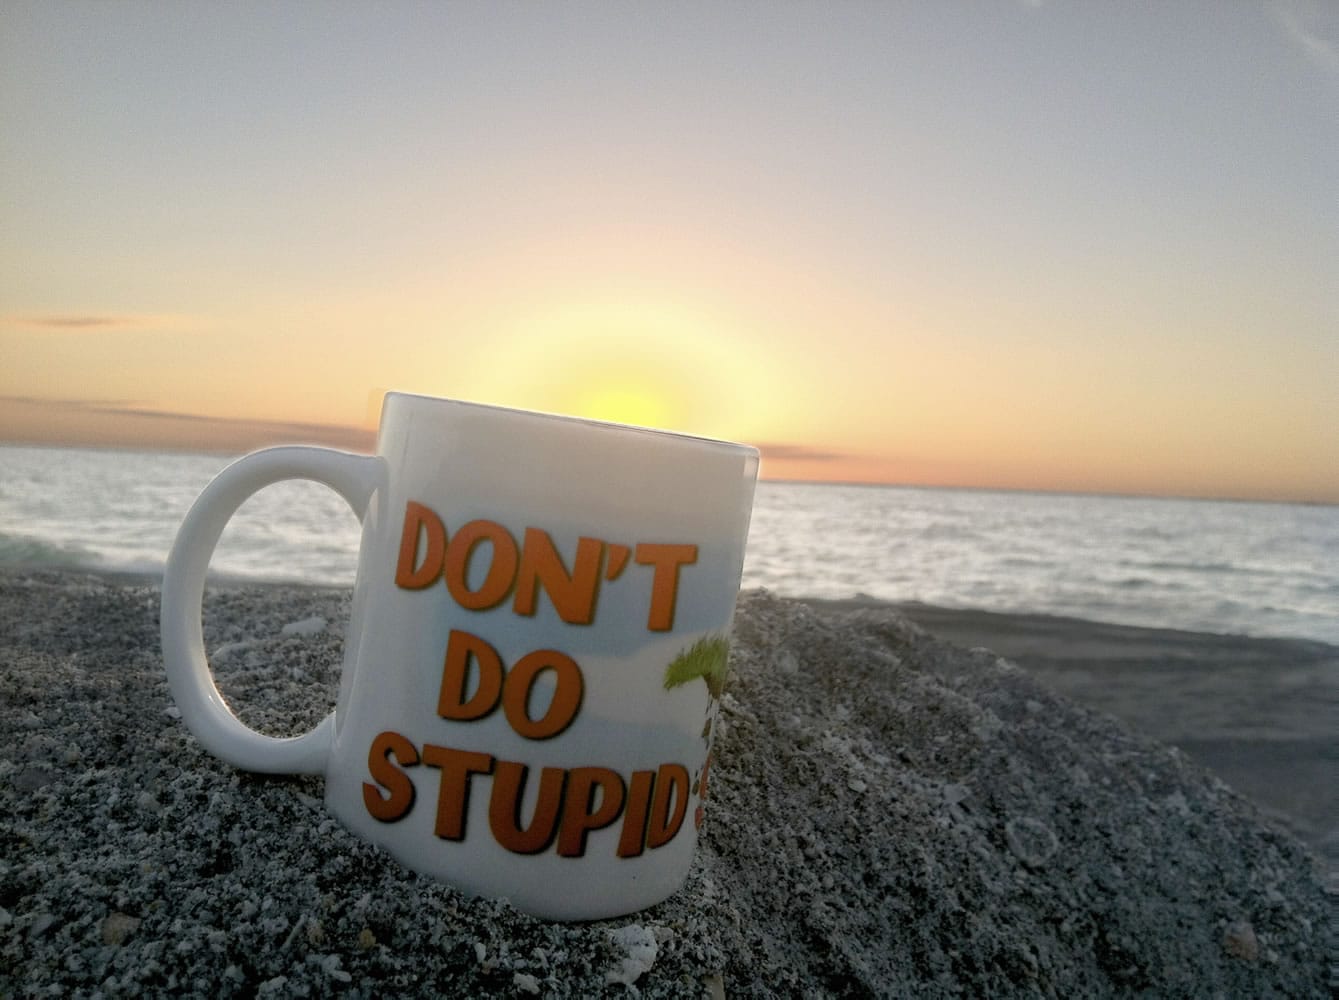 The popular Don't Do Stupid Stuff mugs are back in stock, just in time for Valentine's Day if you're looking for that last-minute one-of-a-kind gift.